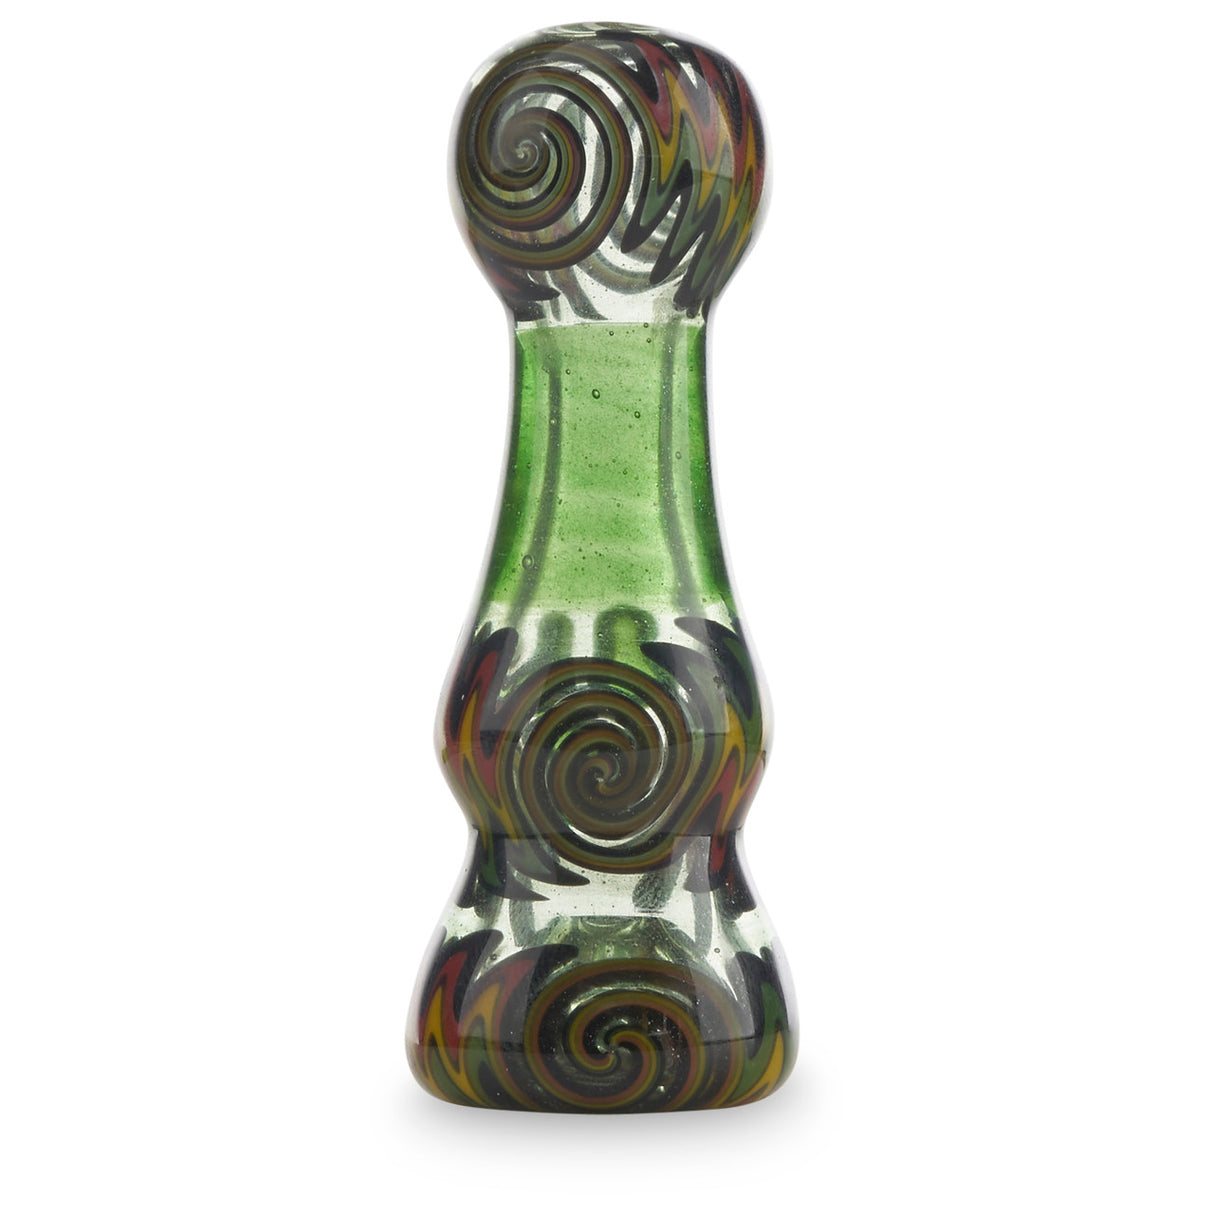 andy g glass fully worked chillum rasta linework at cloud 9 smoke co